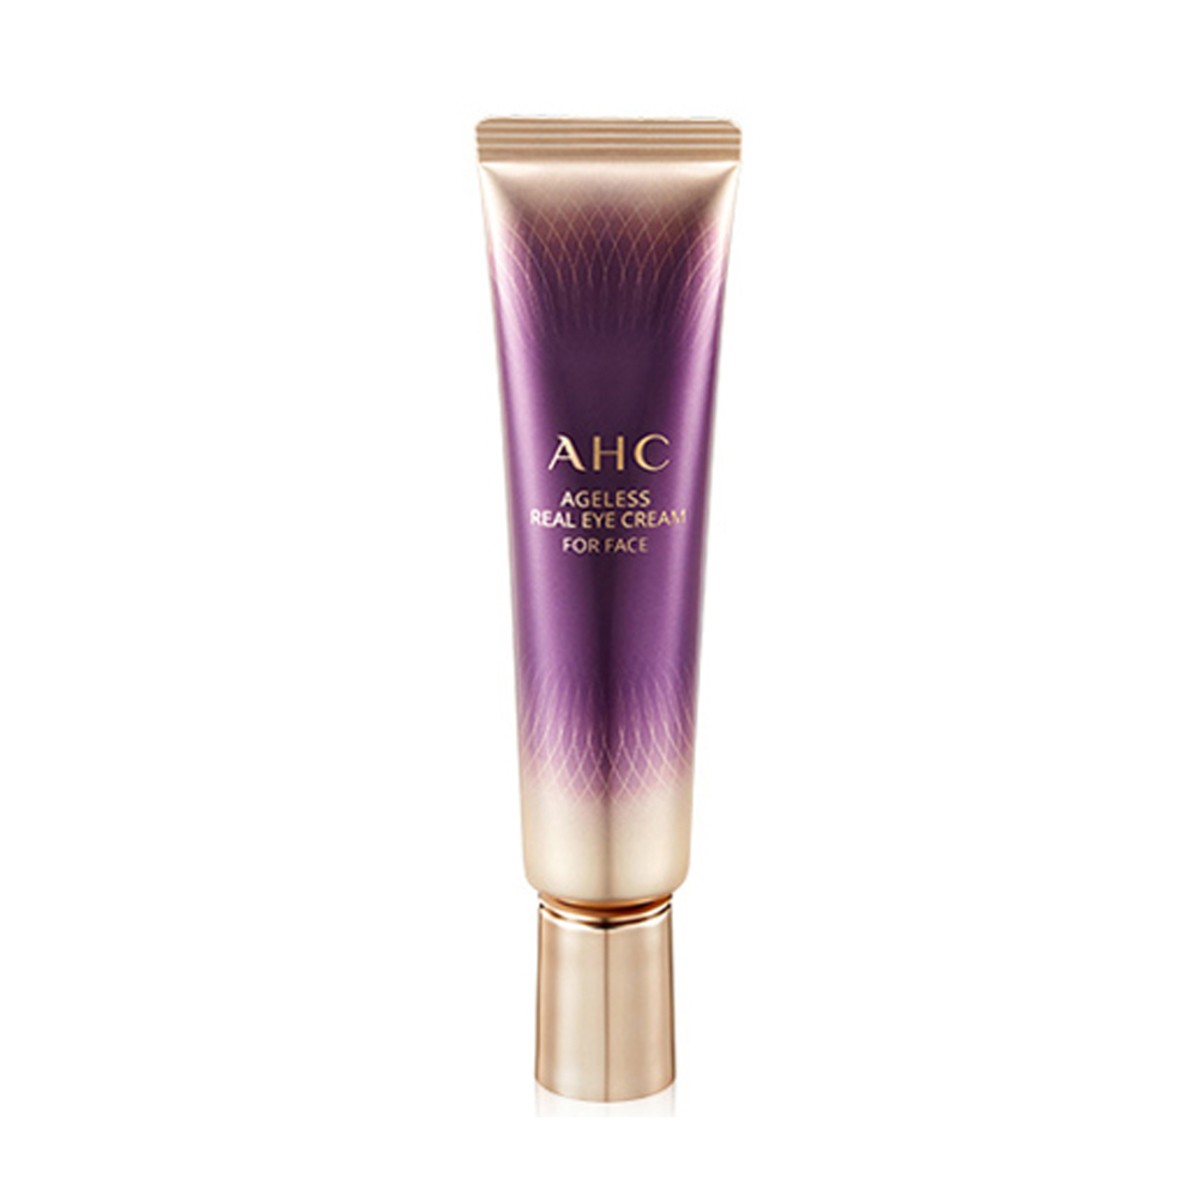 A.H.C - Ageless Real Eye Cream For Face